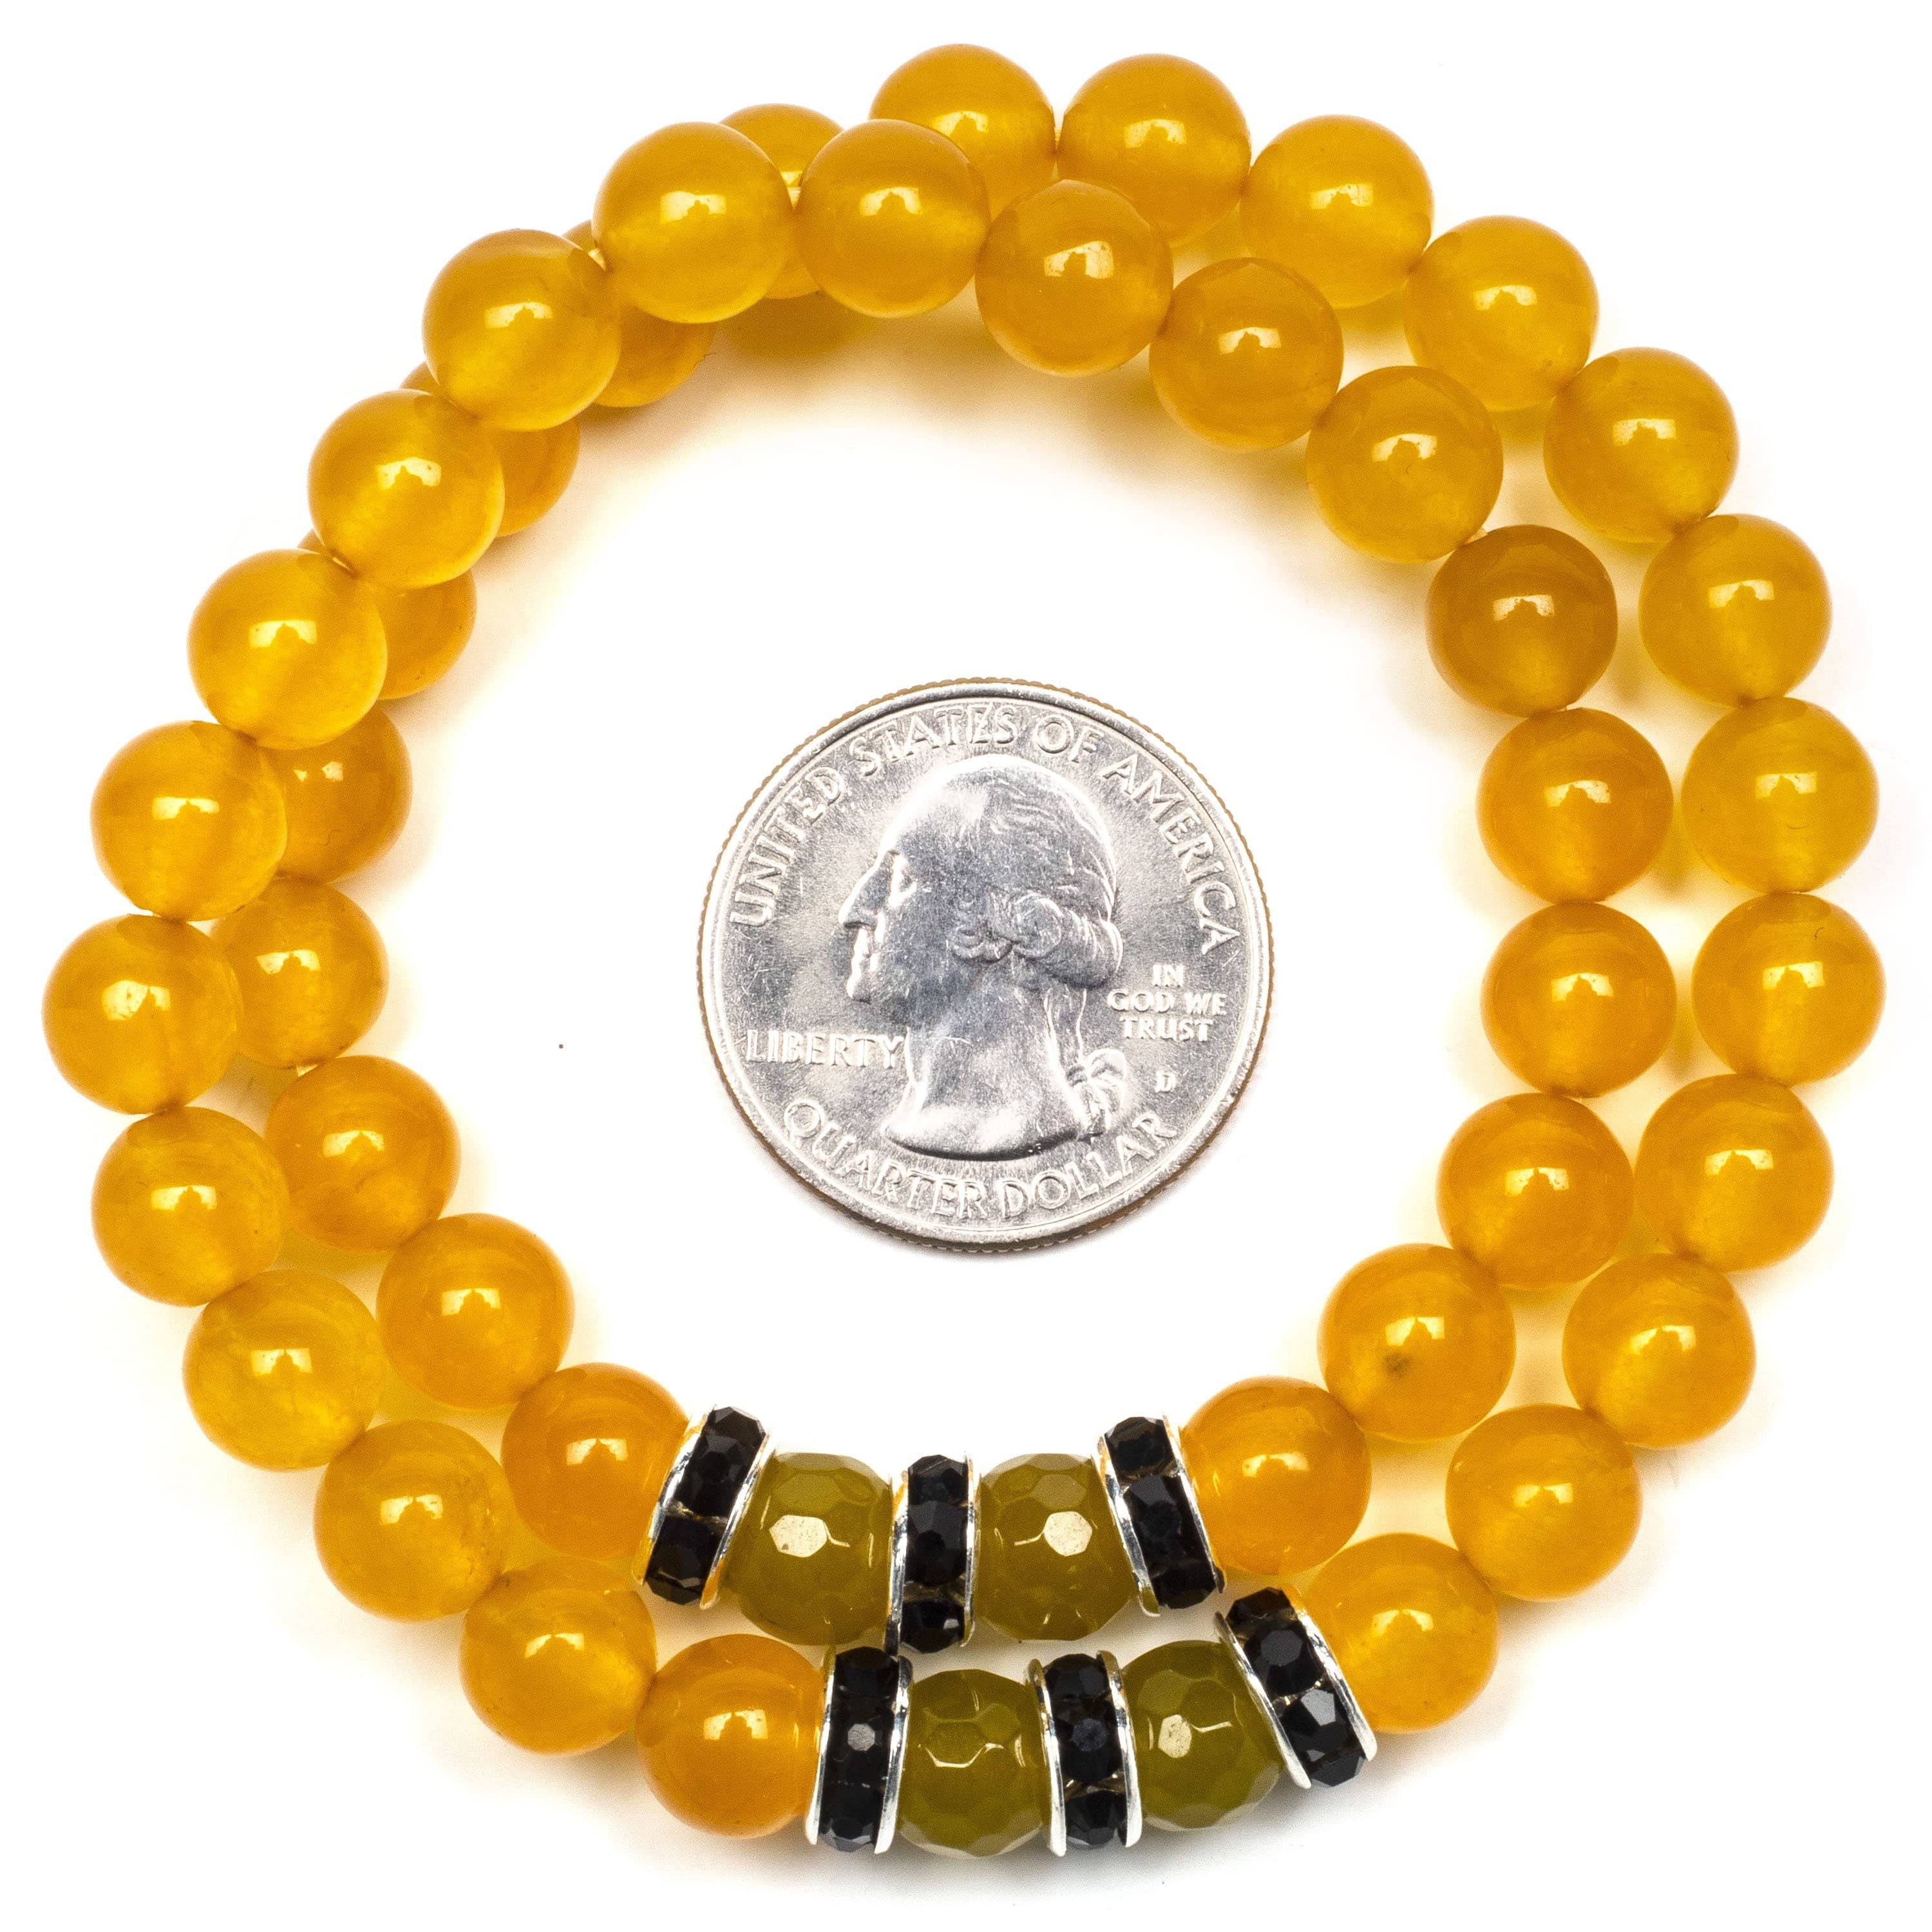 Kalifano Gemstone Bracelets Yellow Agate 8mm Beads with Green Agate and Black and Silver Accent Beads Double Wrap Elastic Gemstone Bracelet WHITE-BGI2-027